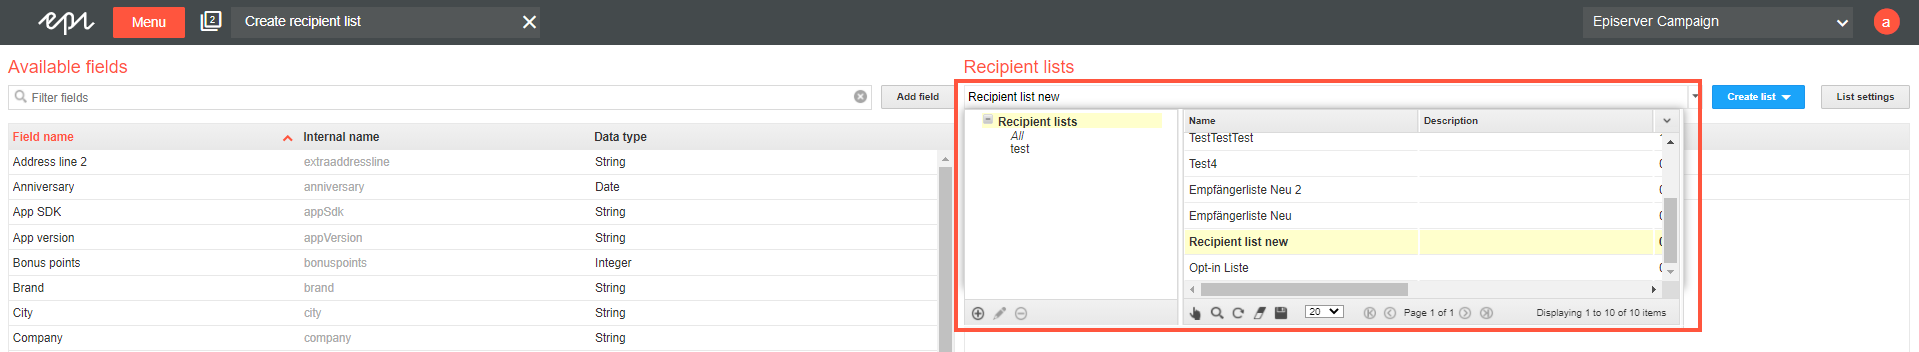 Image: Selecting a recipient list